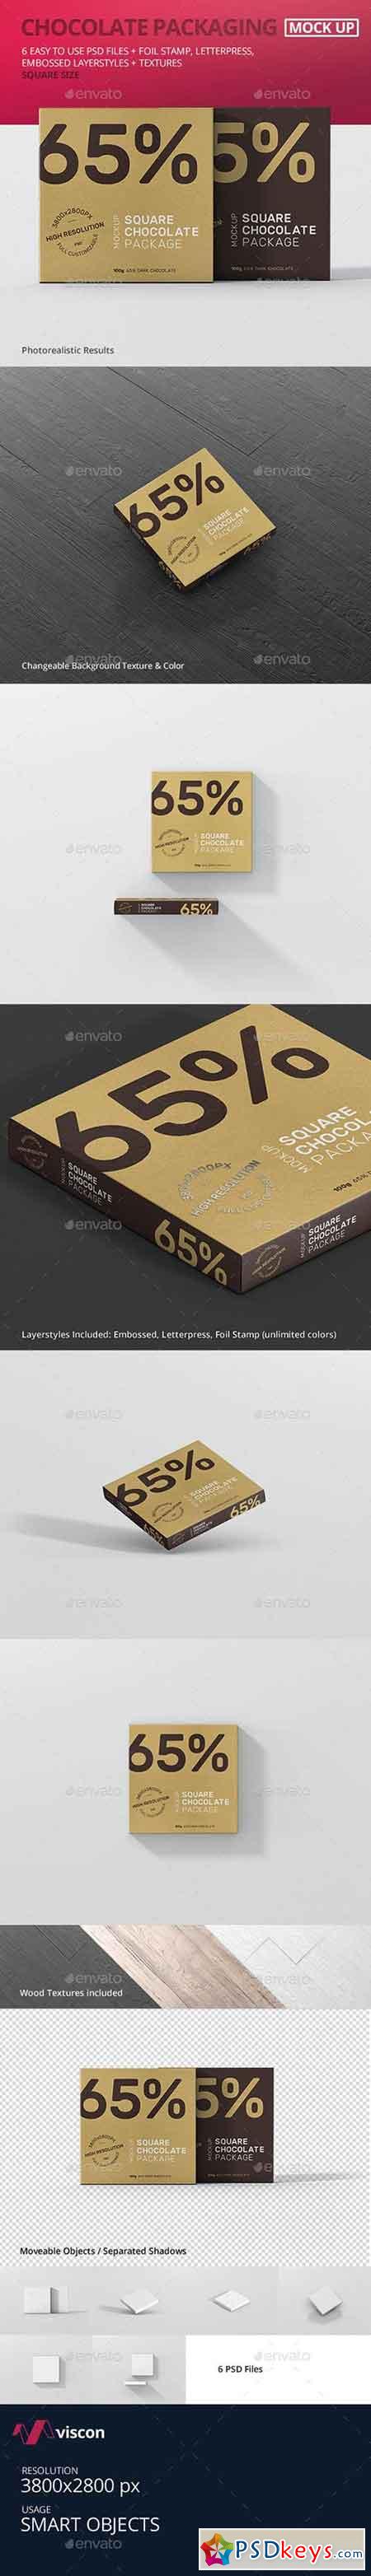 Chocolate Packaging Mockup Square Size 19418009